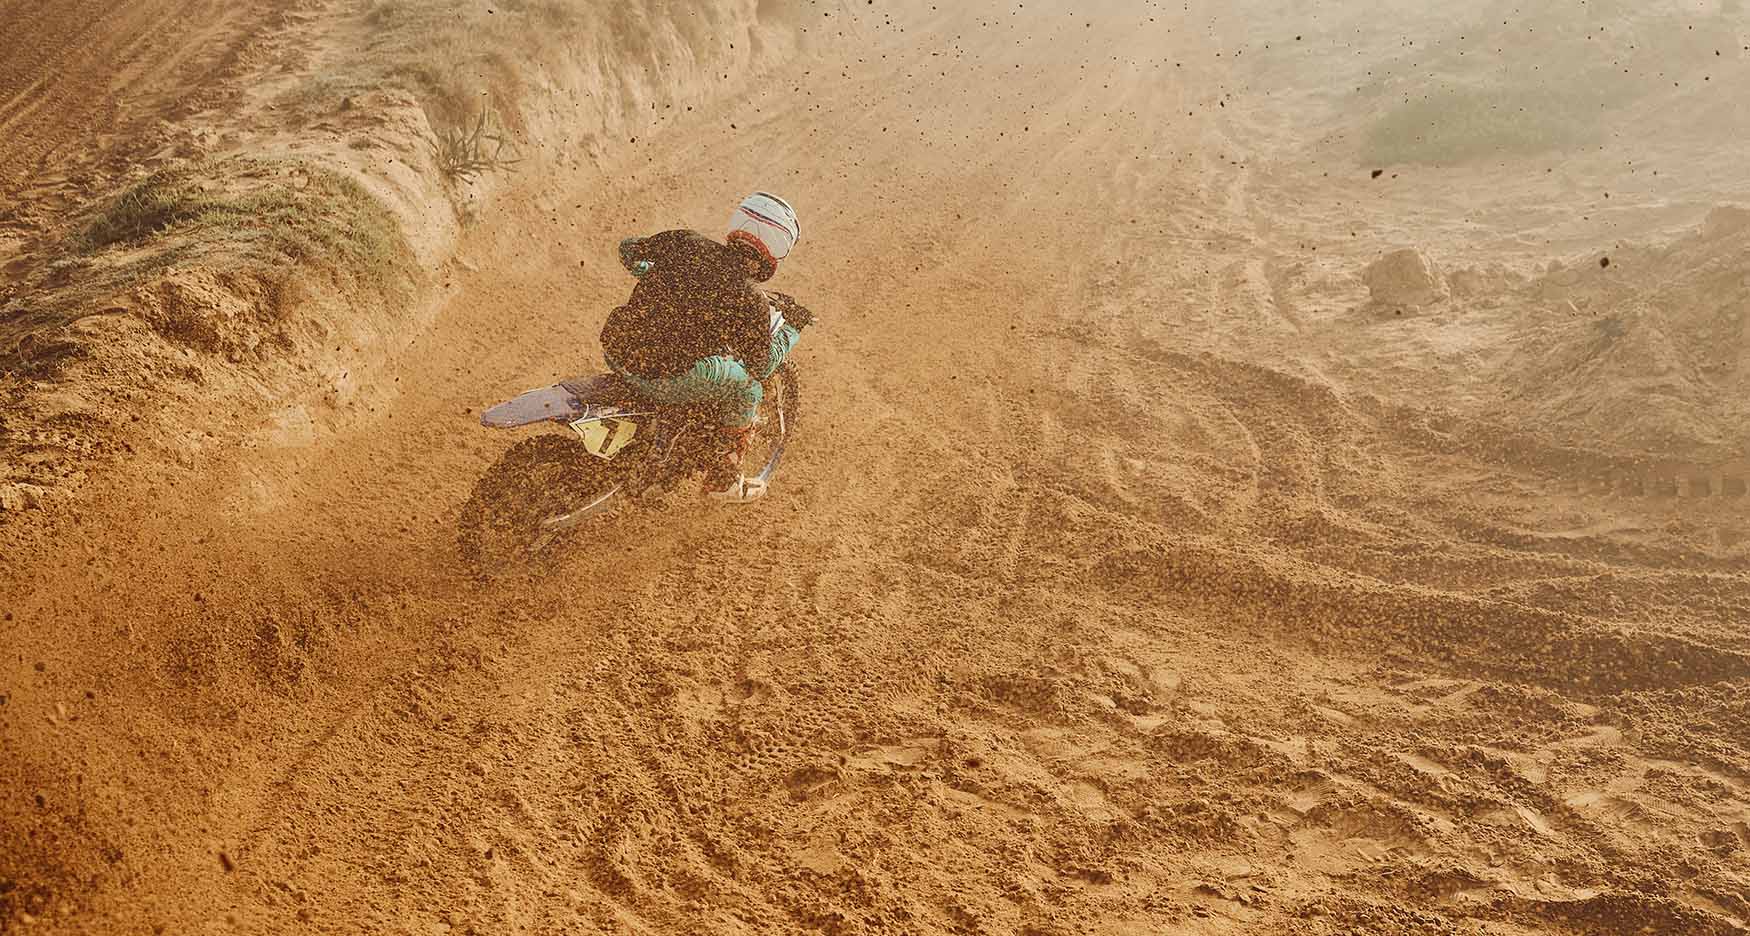 overhead view of someone riding a dirt bike